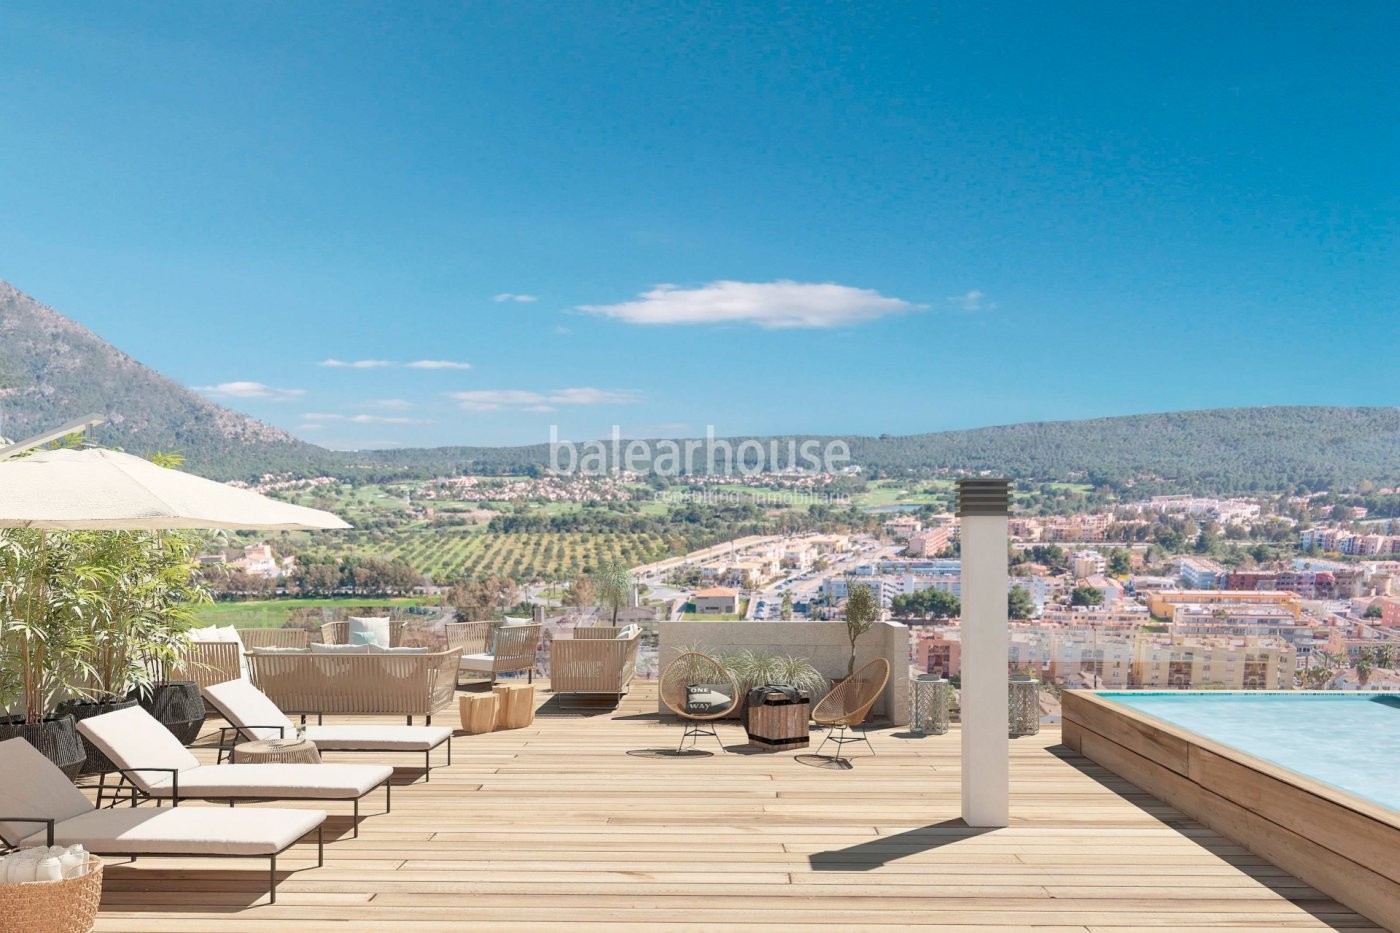 Modern new homes in Santa Ponsa with terraces, garden, swimming pool and unobstructed views.